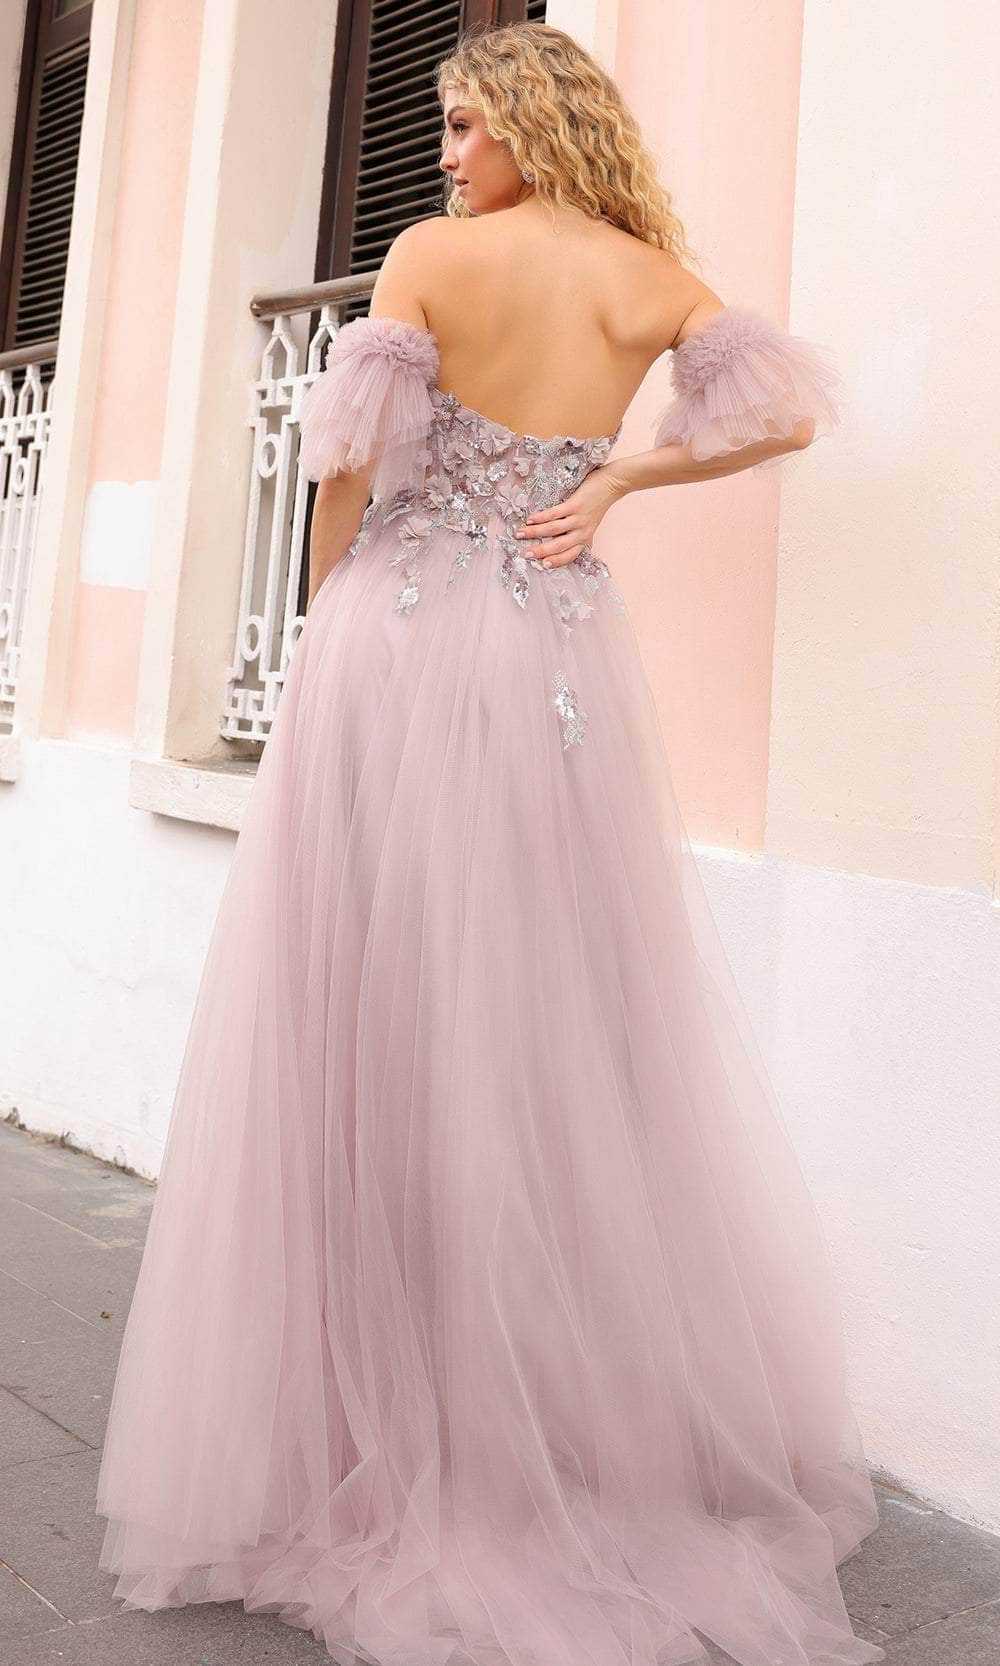 Nox Anabel, Nox Anabel E1453 - 3D Floral Embellished Strapless Prom Gown